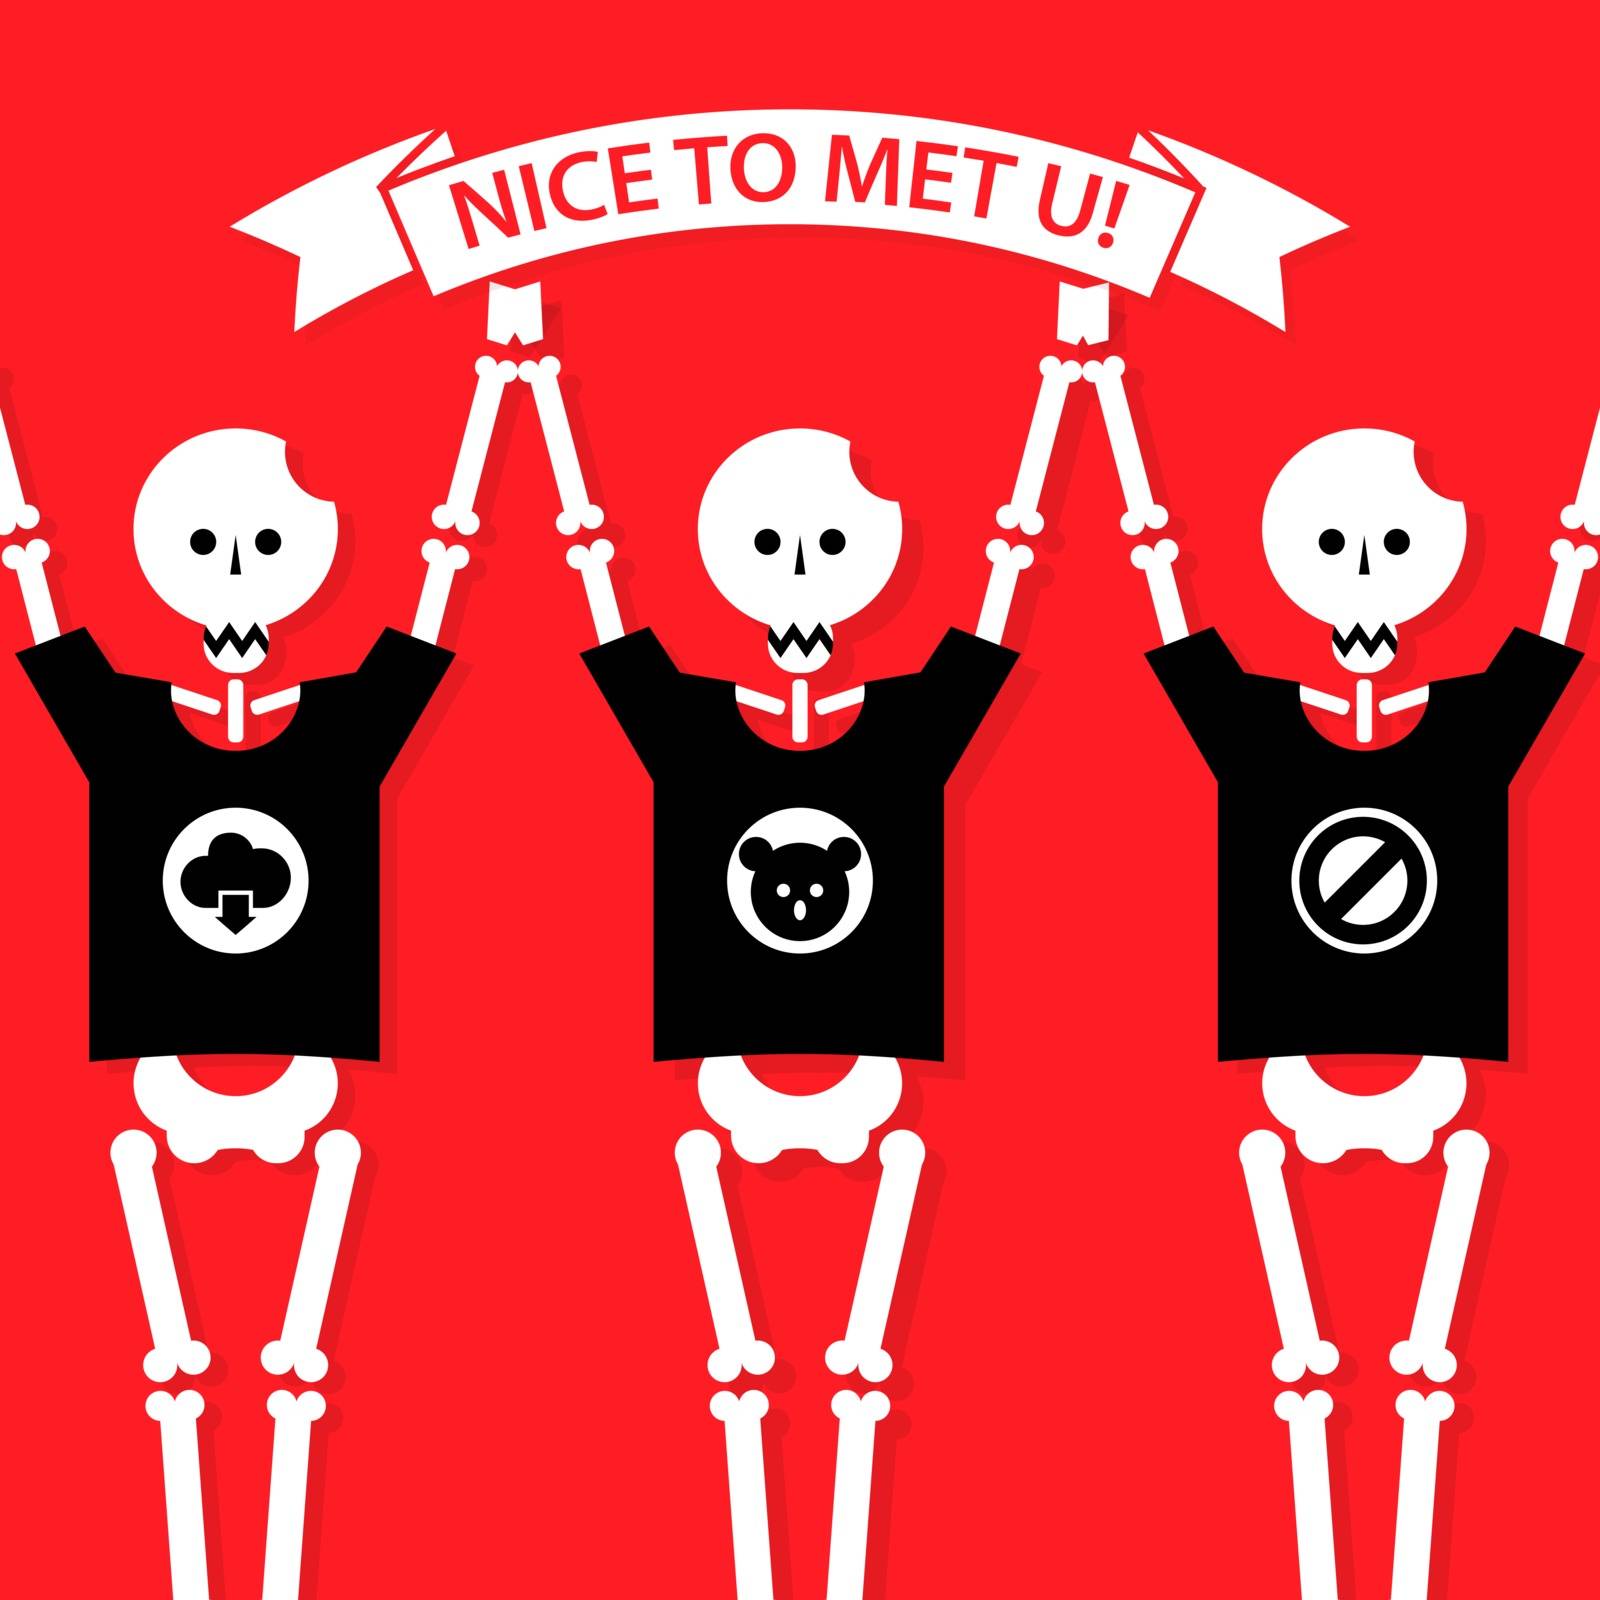 Cartoon vector illustration funny human skeletons in t-shirts with ribbon. Flat design element.